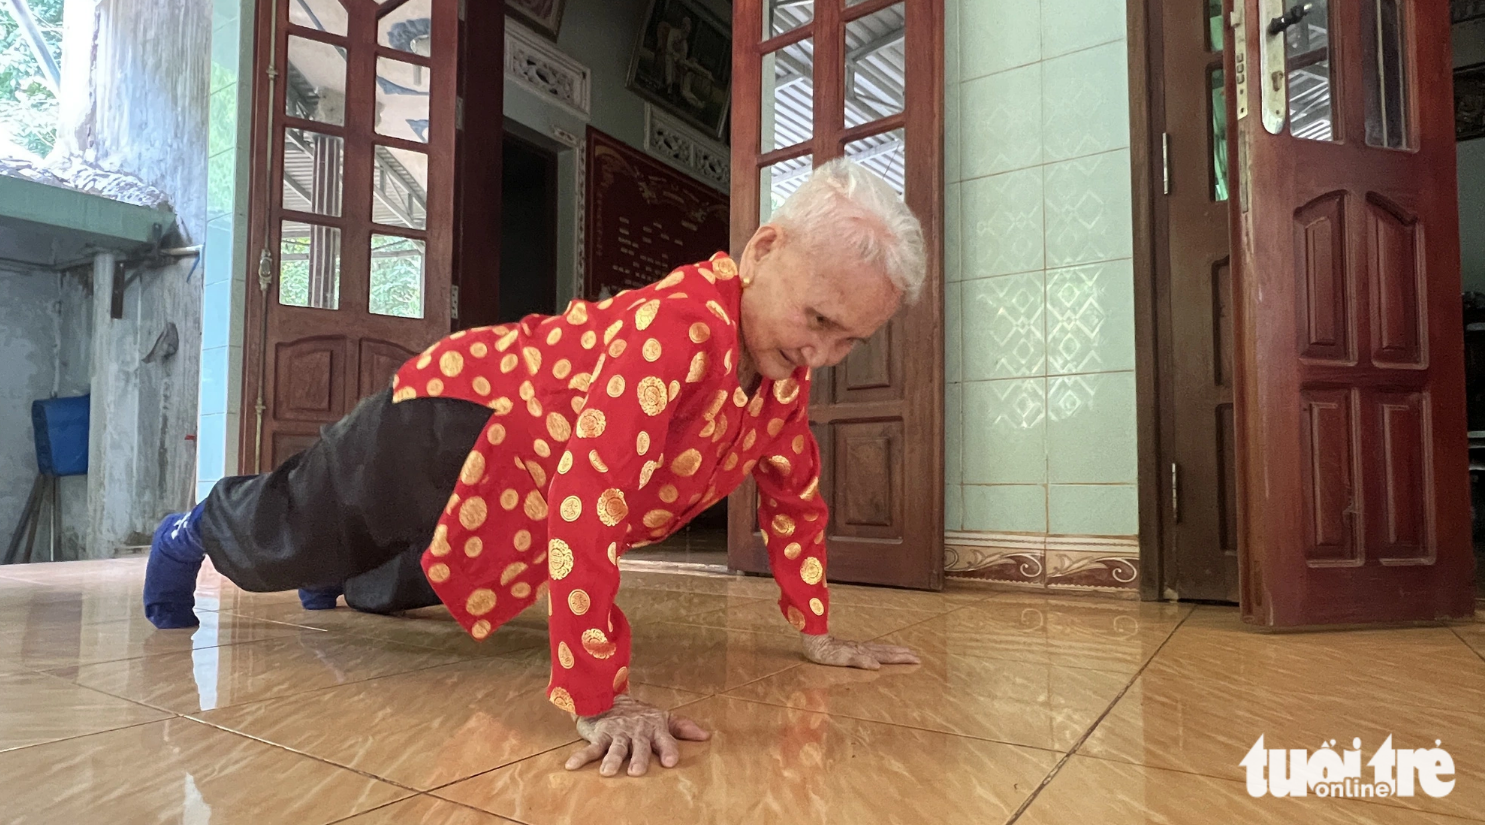 In Vietnam, centenarian does daily push-ups for good health